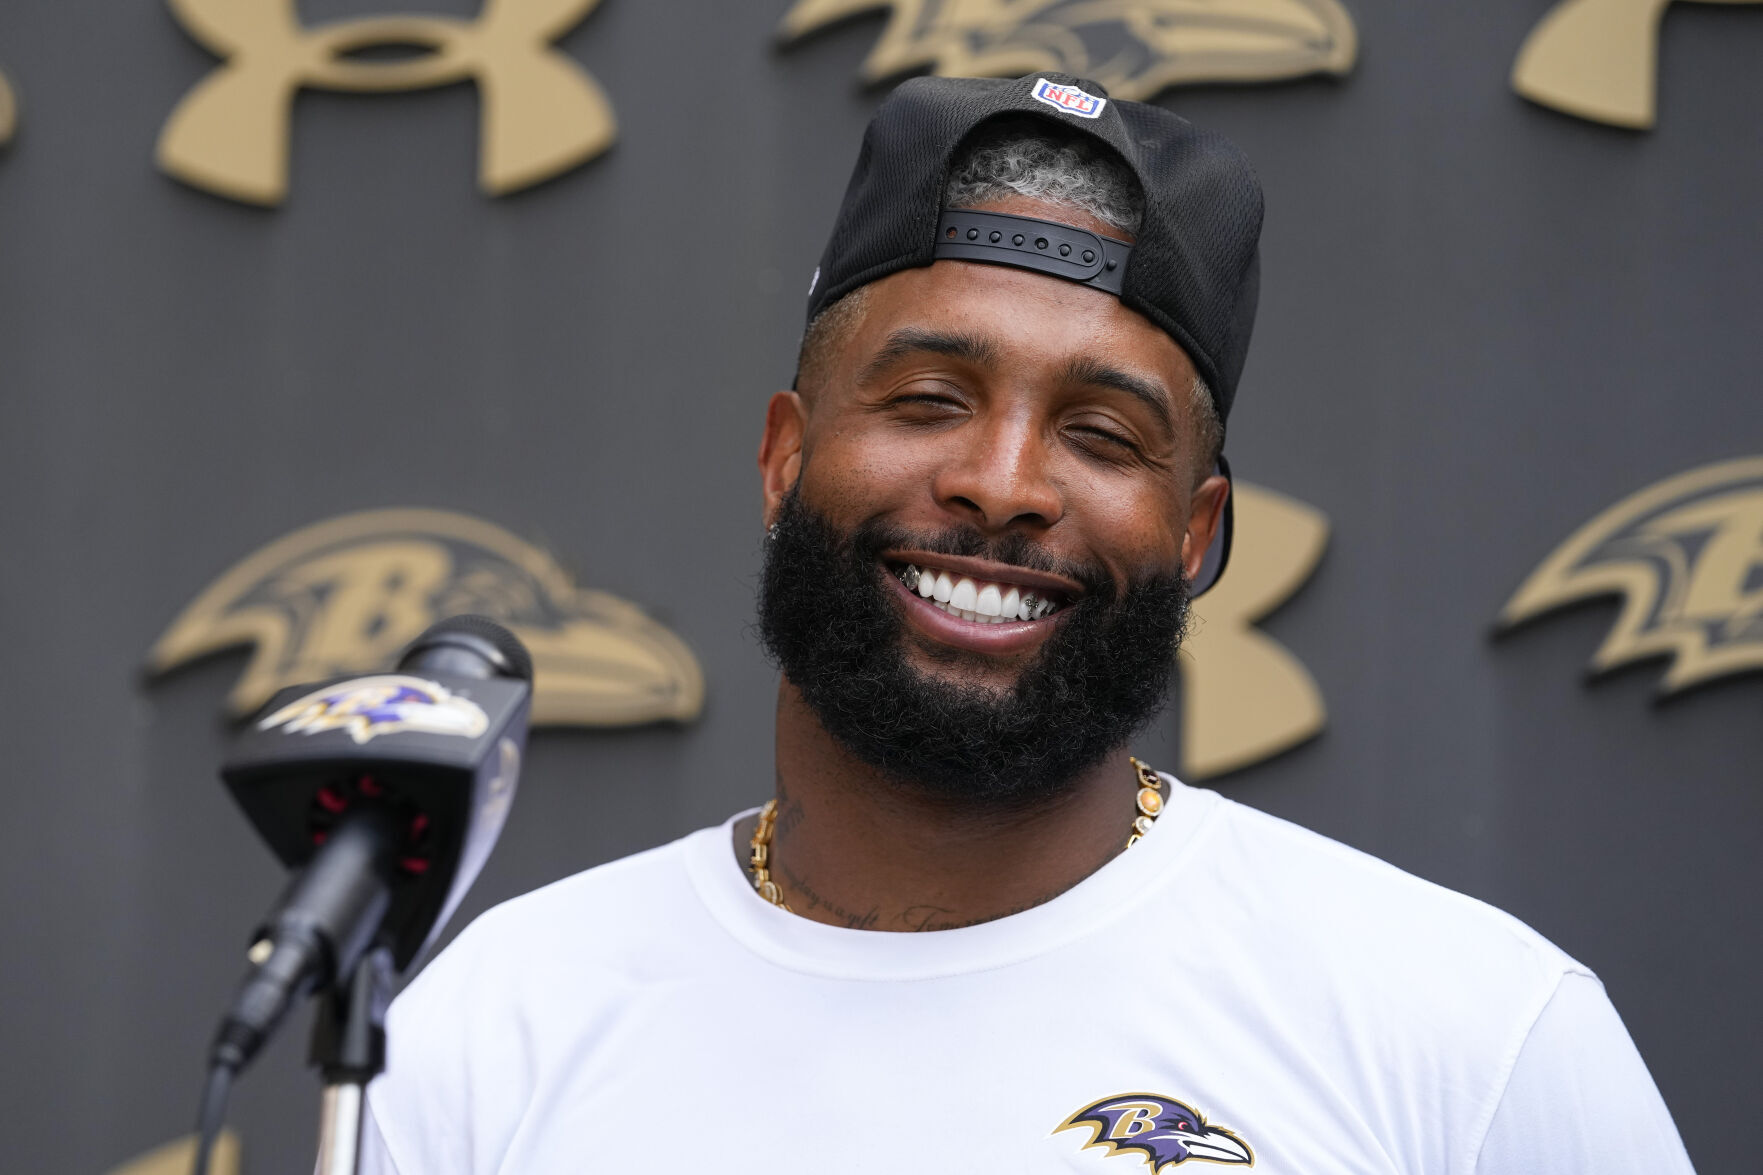 Wide receivers Odell Beckham Jr. and Zay Flowers spark joy in the Baltimore Ravens